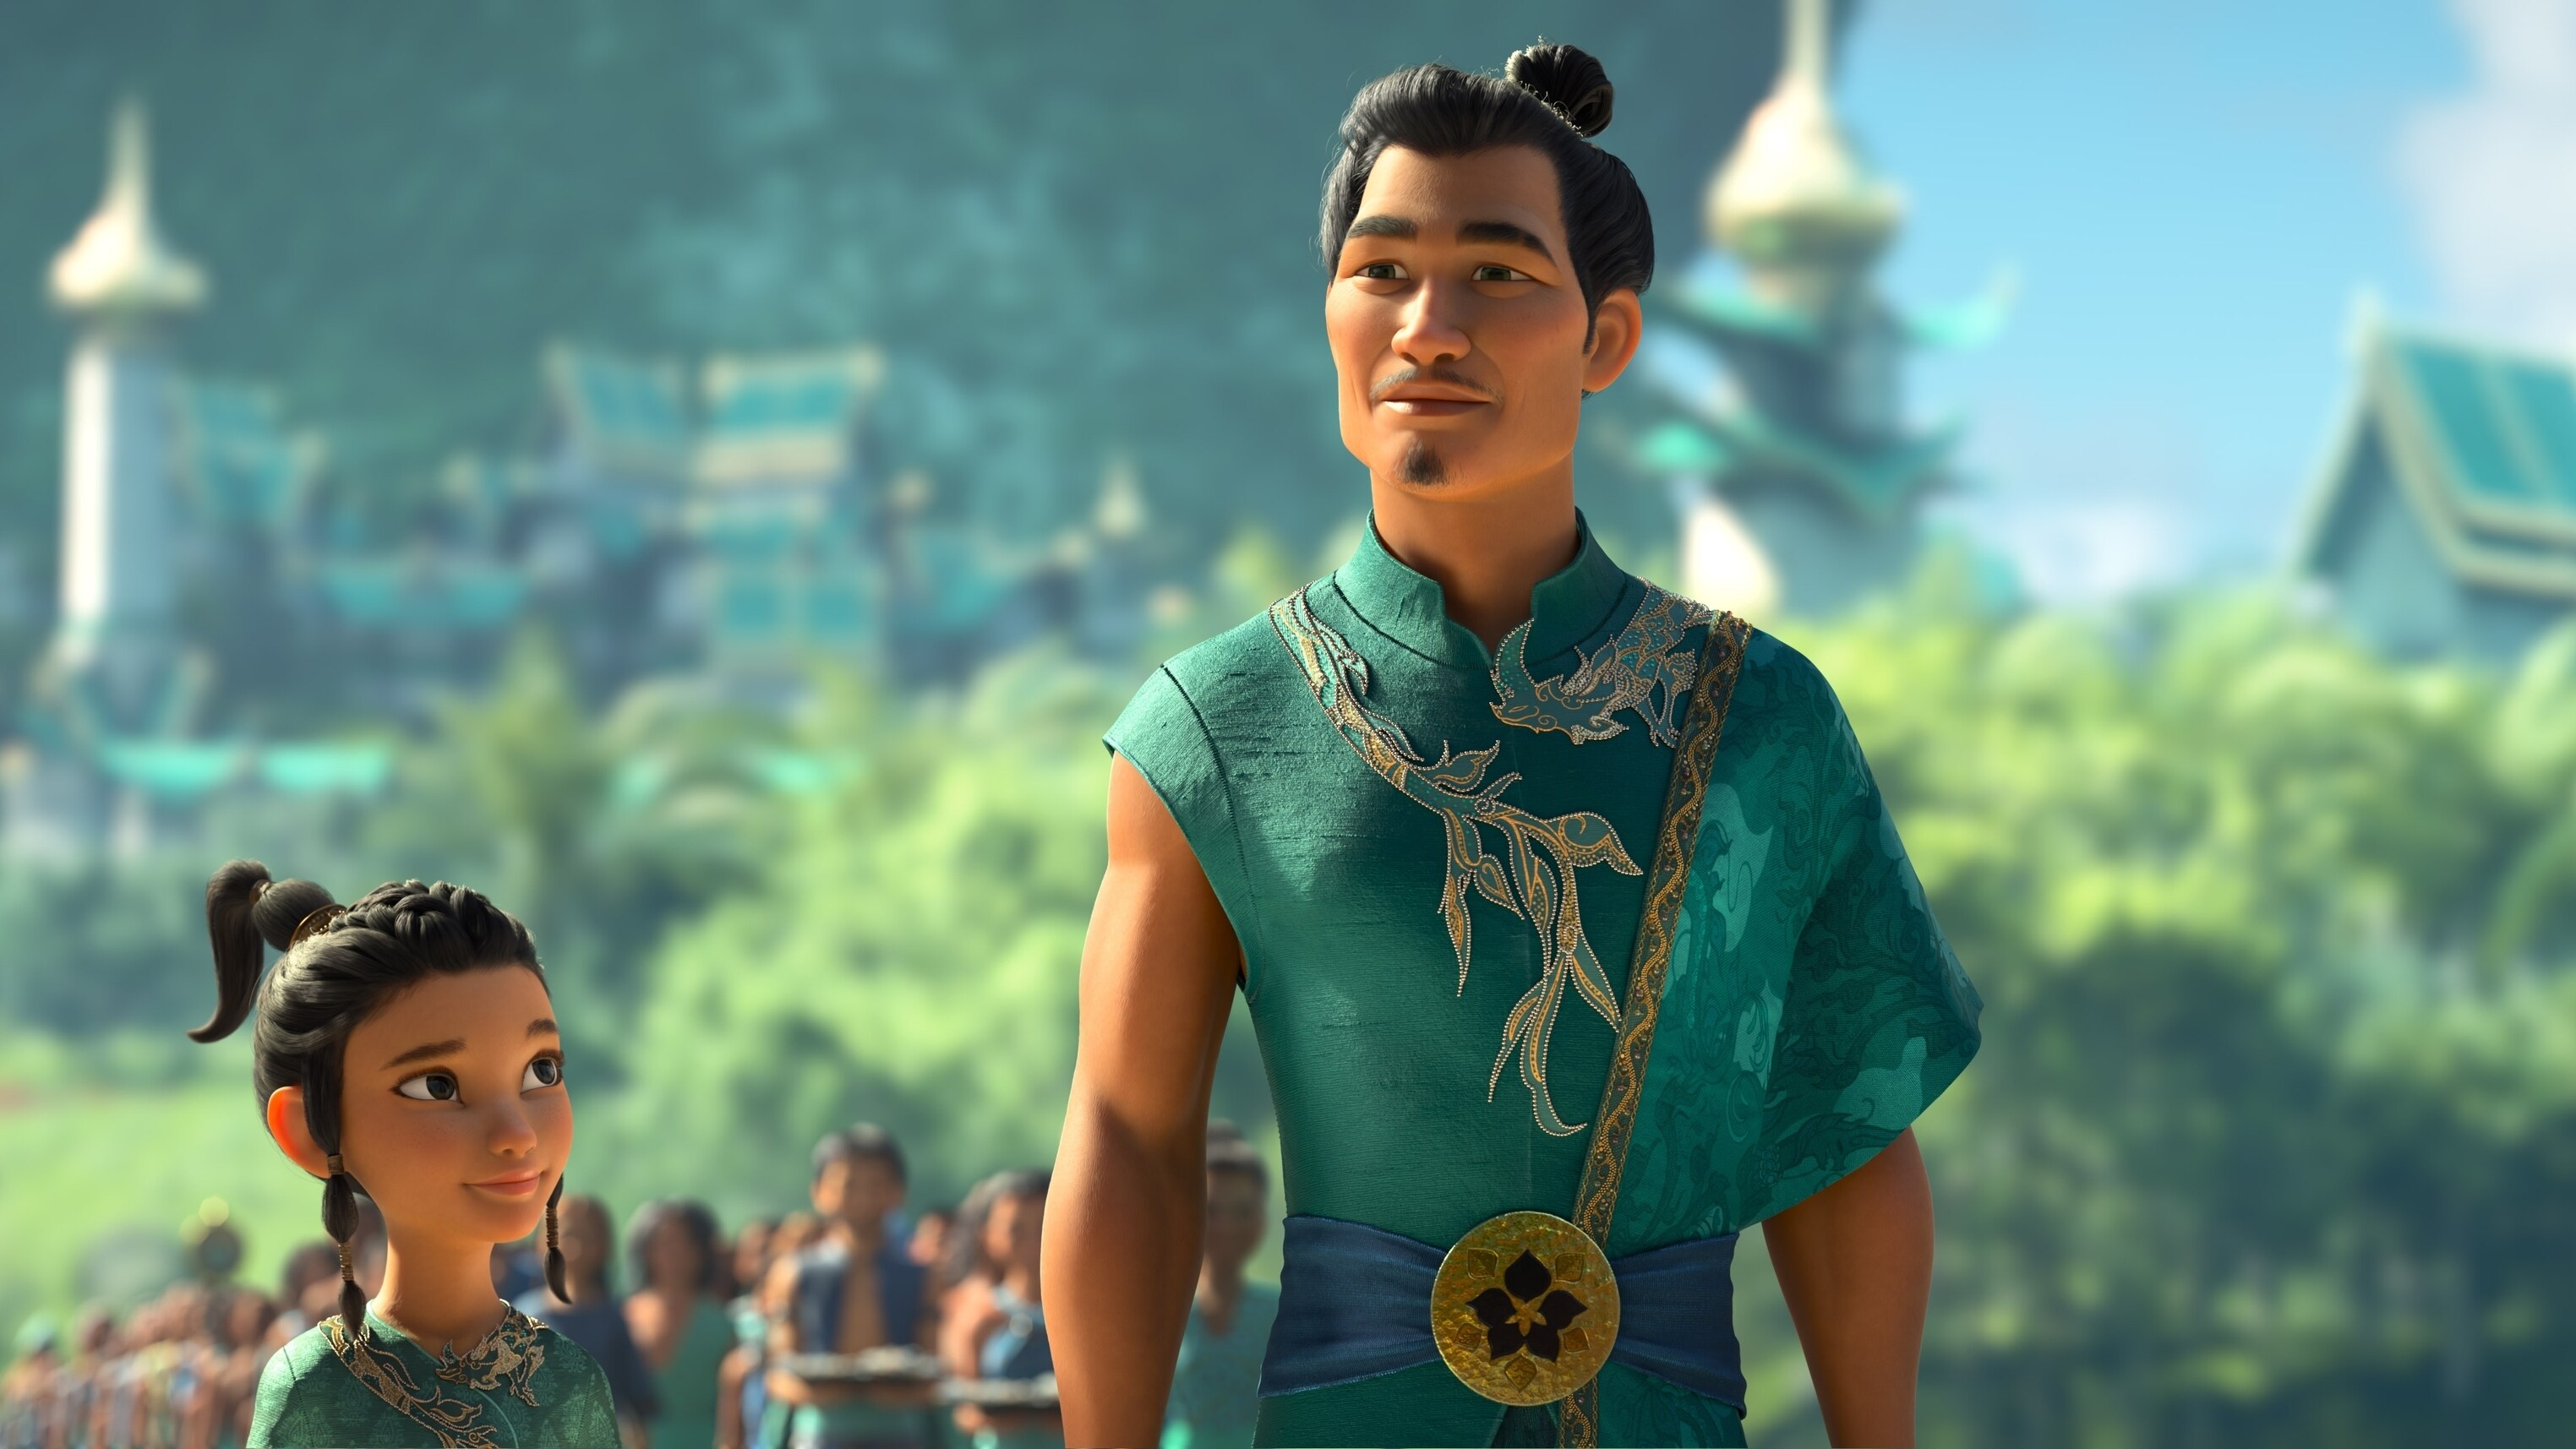 oung Raya looks up to her beloved father Benja, Chief of the Heart Lands. Benja, the legendary Guardian of the Dragon Gem, is an idealistic and bold visionary who seeks to reunite the fractured kingdom of Kumandra and restore harmony. Featuring Daniel Dae Kim as the voice of Chief Benja, Walt Disney Animation Studios’ “Raya and the Last Dragon” will be in theaters and on Disney+ with Premier Access on March 5, 2021. © 2021 Disney. All Rights Reserved.